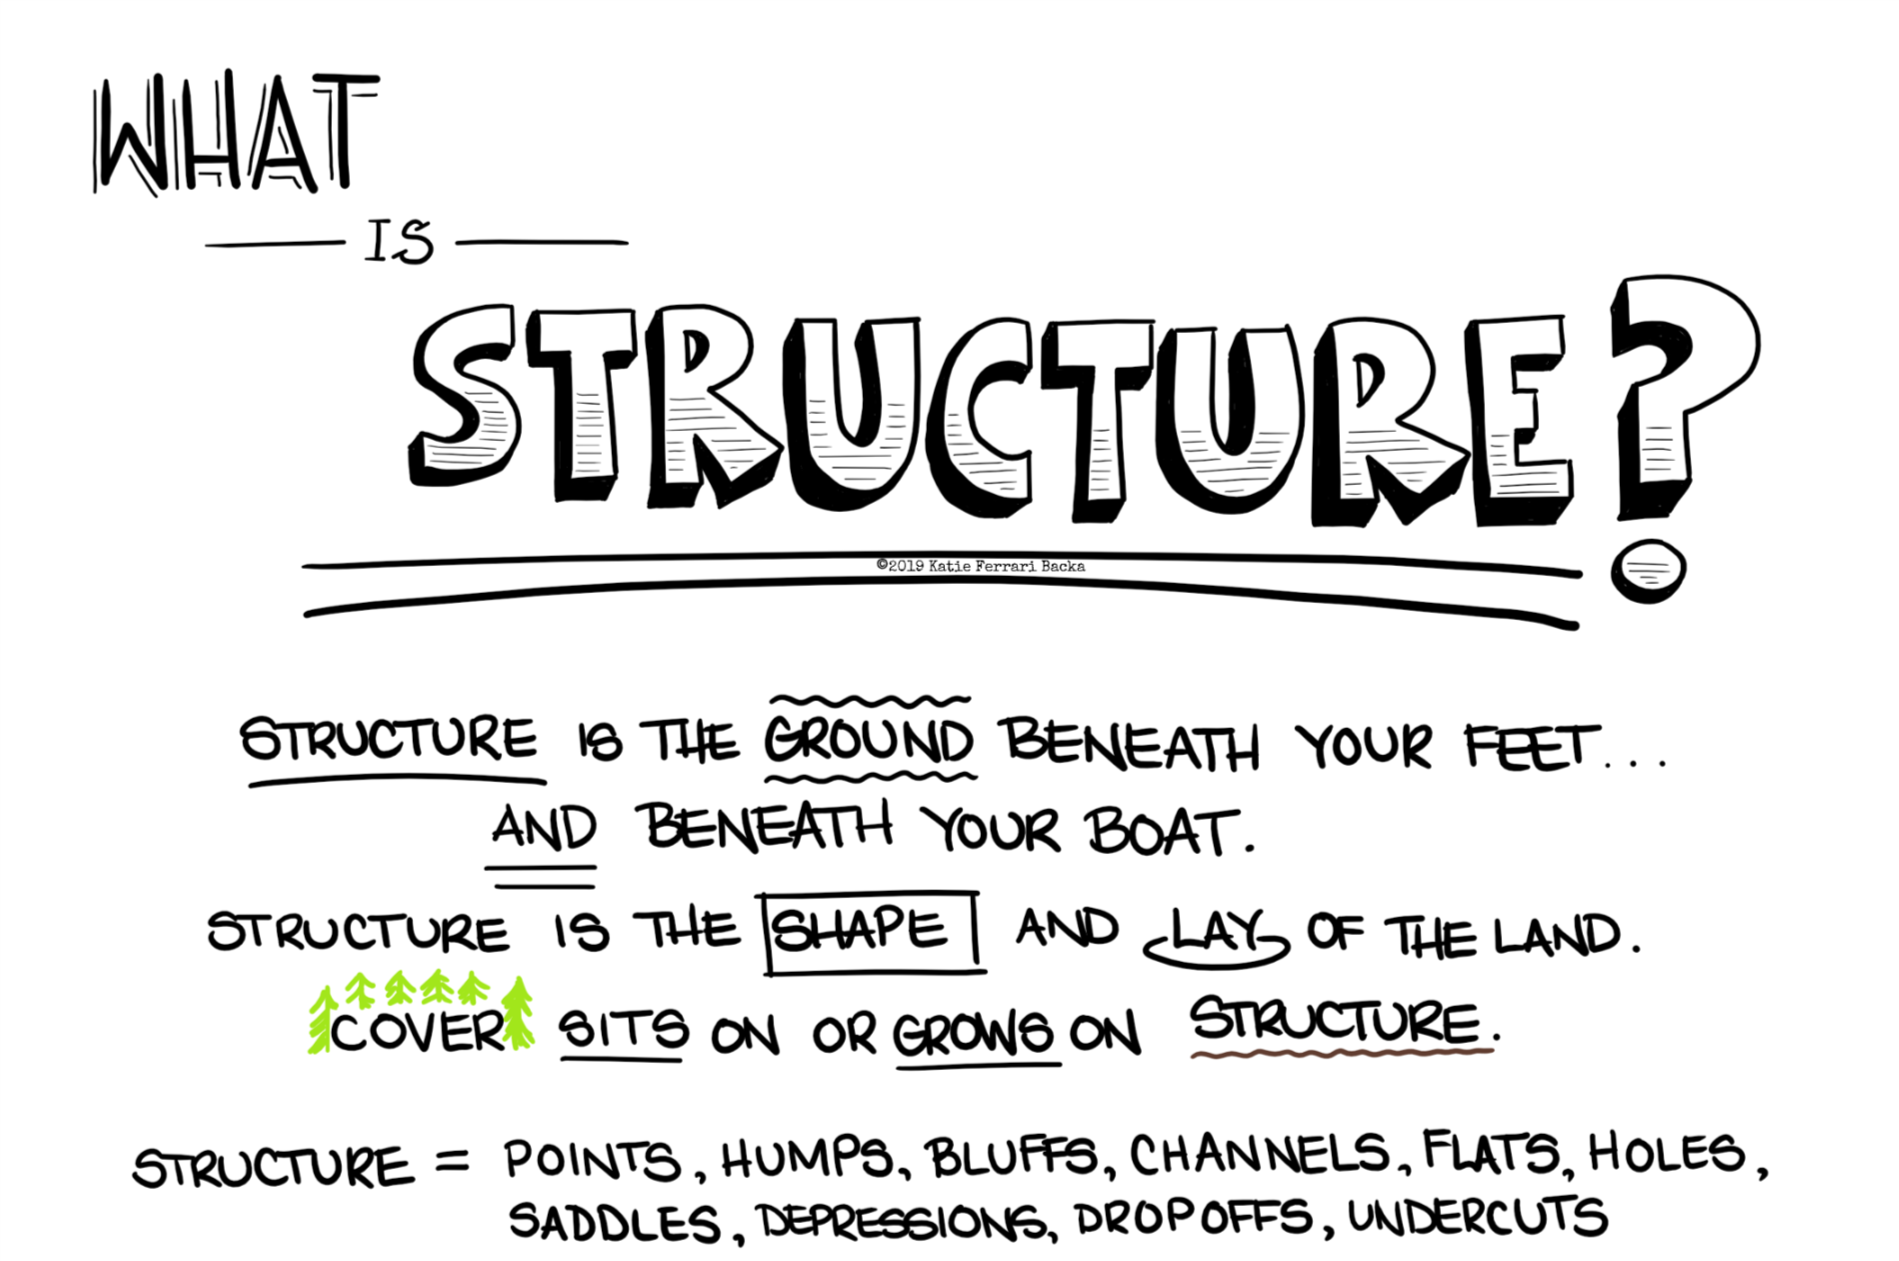 Written script: What is structure? Structure is the ground beneath your feet and beneath your boat. Structure is the shape and lay of the land. Cover sits on or grows on structure. Structure= Points, humps, bluffs, channels, flats, holes, saddles, depressions, drop offs, undercuts